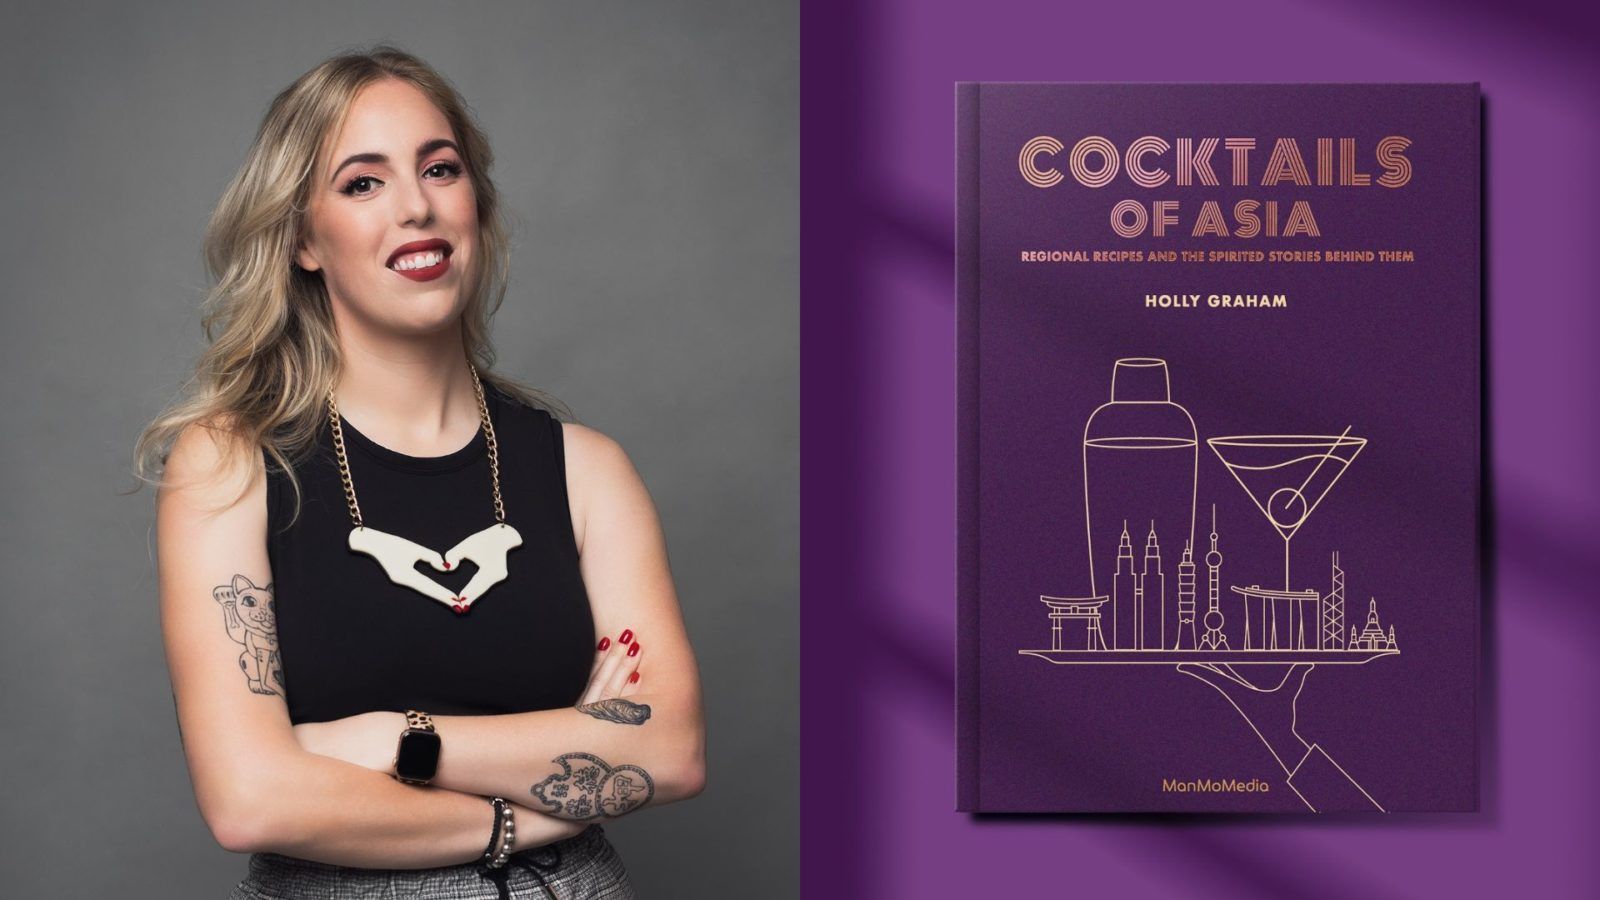 “Cocktails of Asia” is Holly Graham’s love letter to Asia’s bar scene